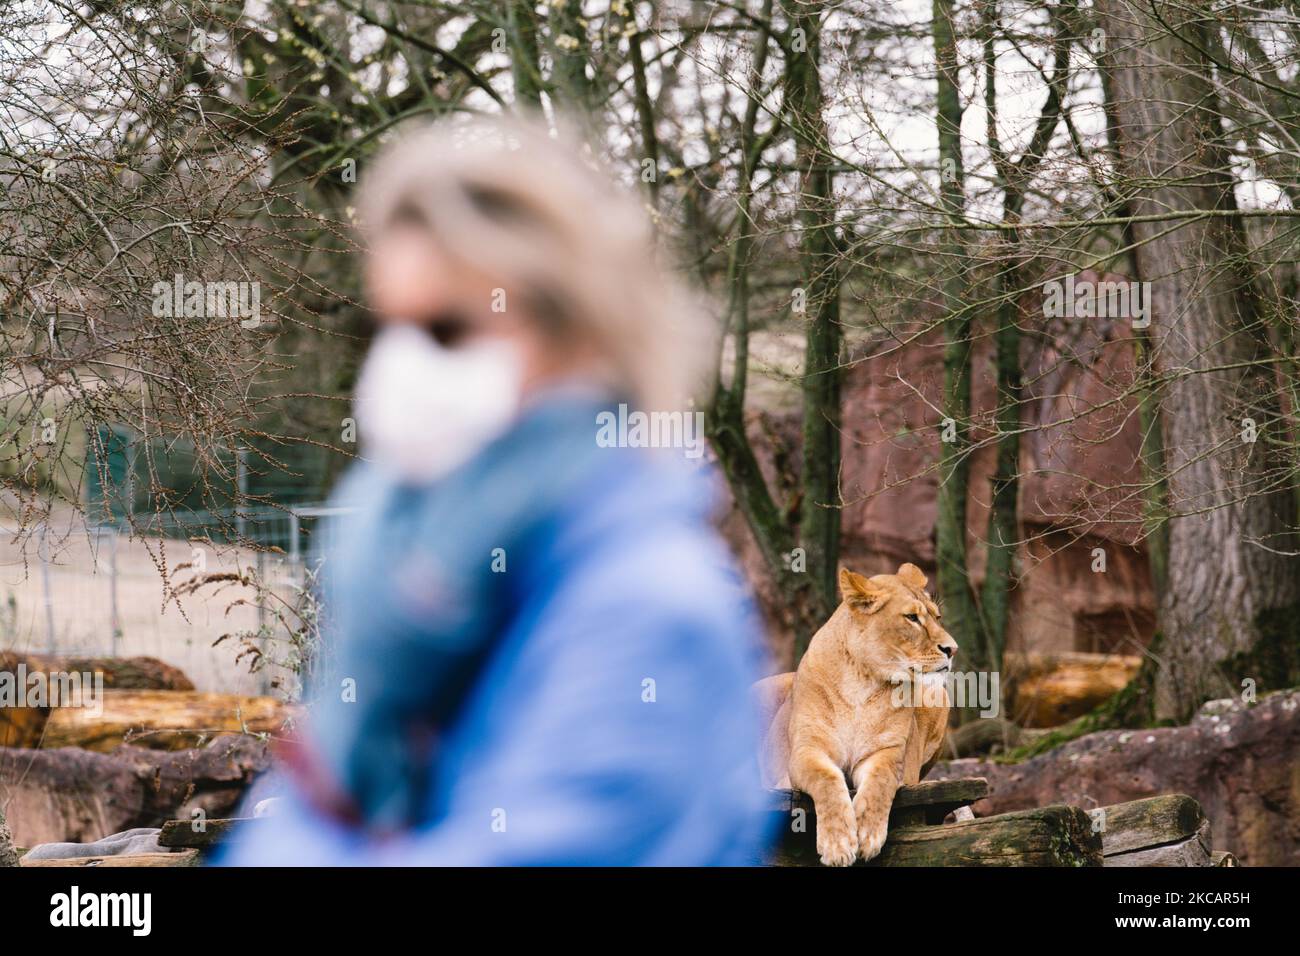 people visit Zoom Erlebniswelt zoo in Gelsenkirchen, Germany on March 12, 2021 as zoos in German allow reopen under strict hygiene rule. (Photo by Ying Tang/NurPhoto) Stock Photo